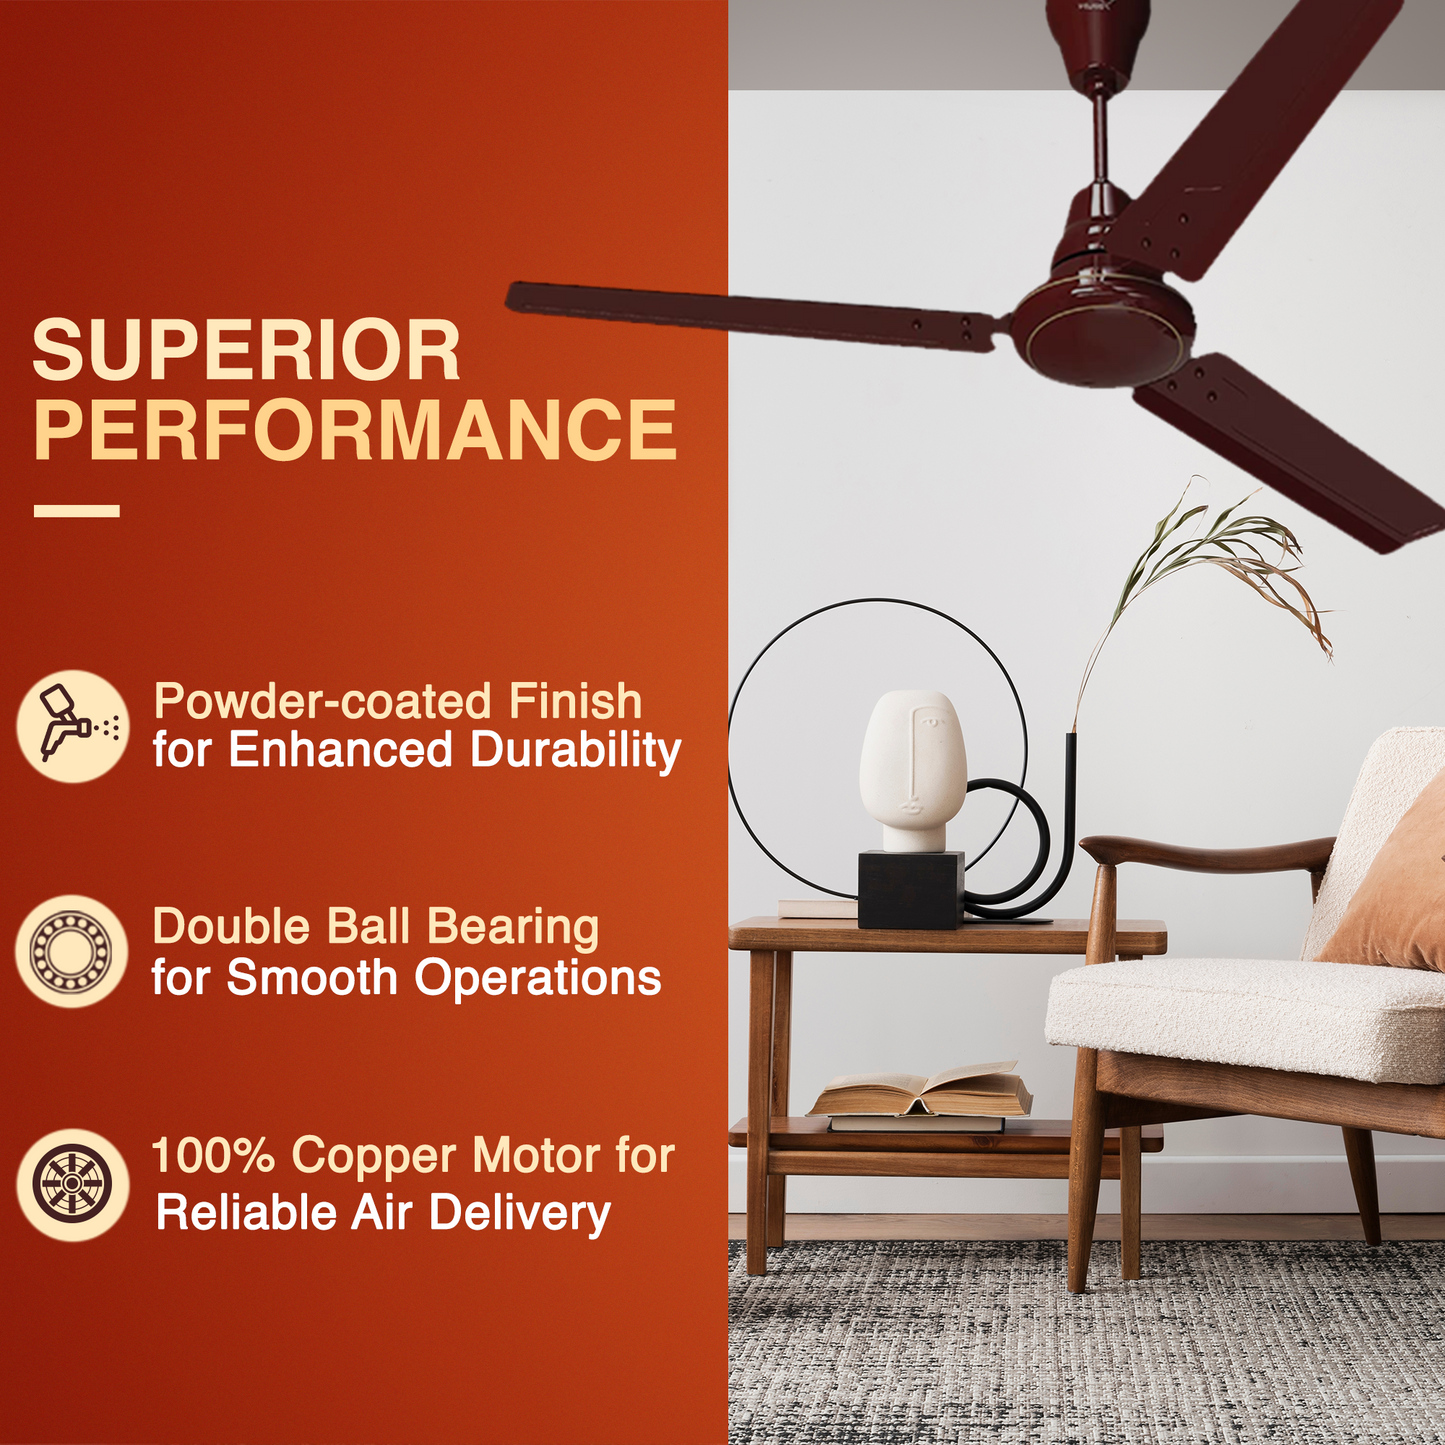 Windle Pro AS High-Speed Ceiling Fan for Home 1.2 m, Cherry Brown